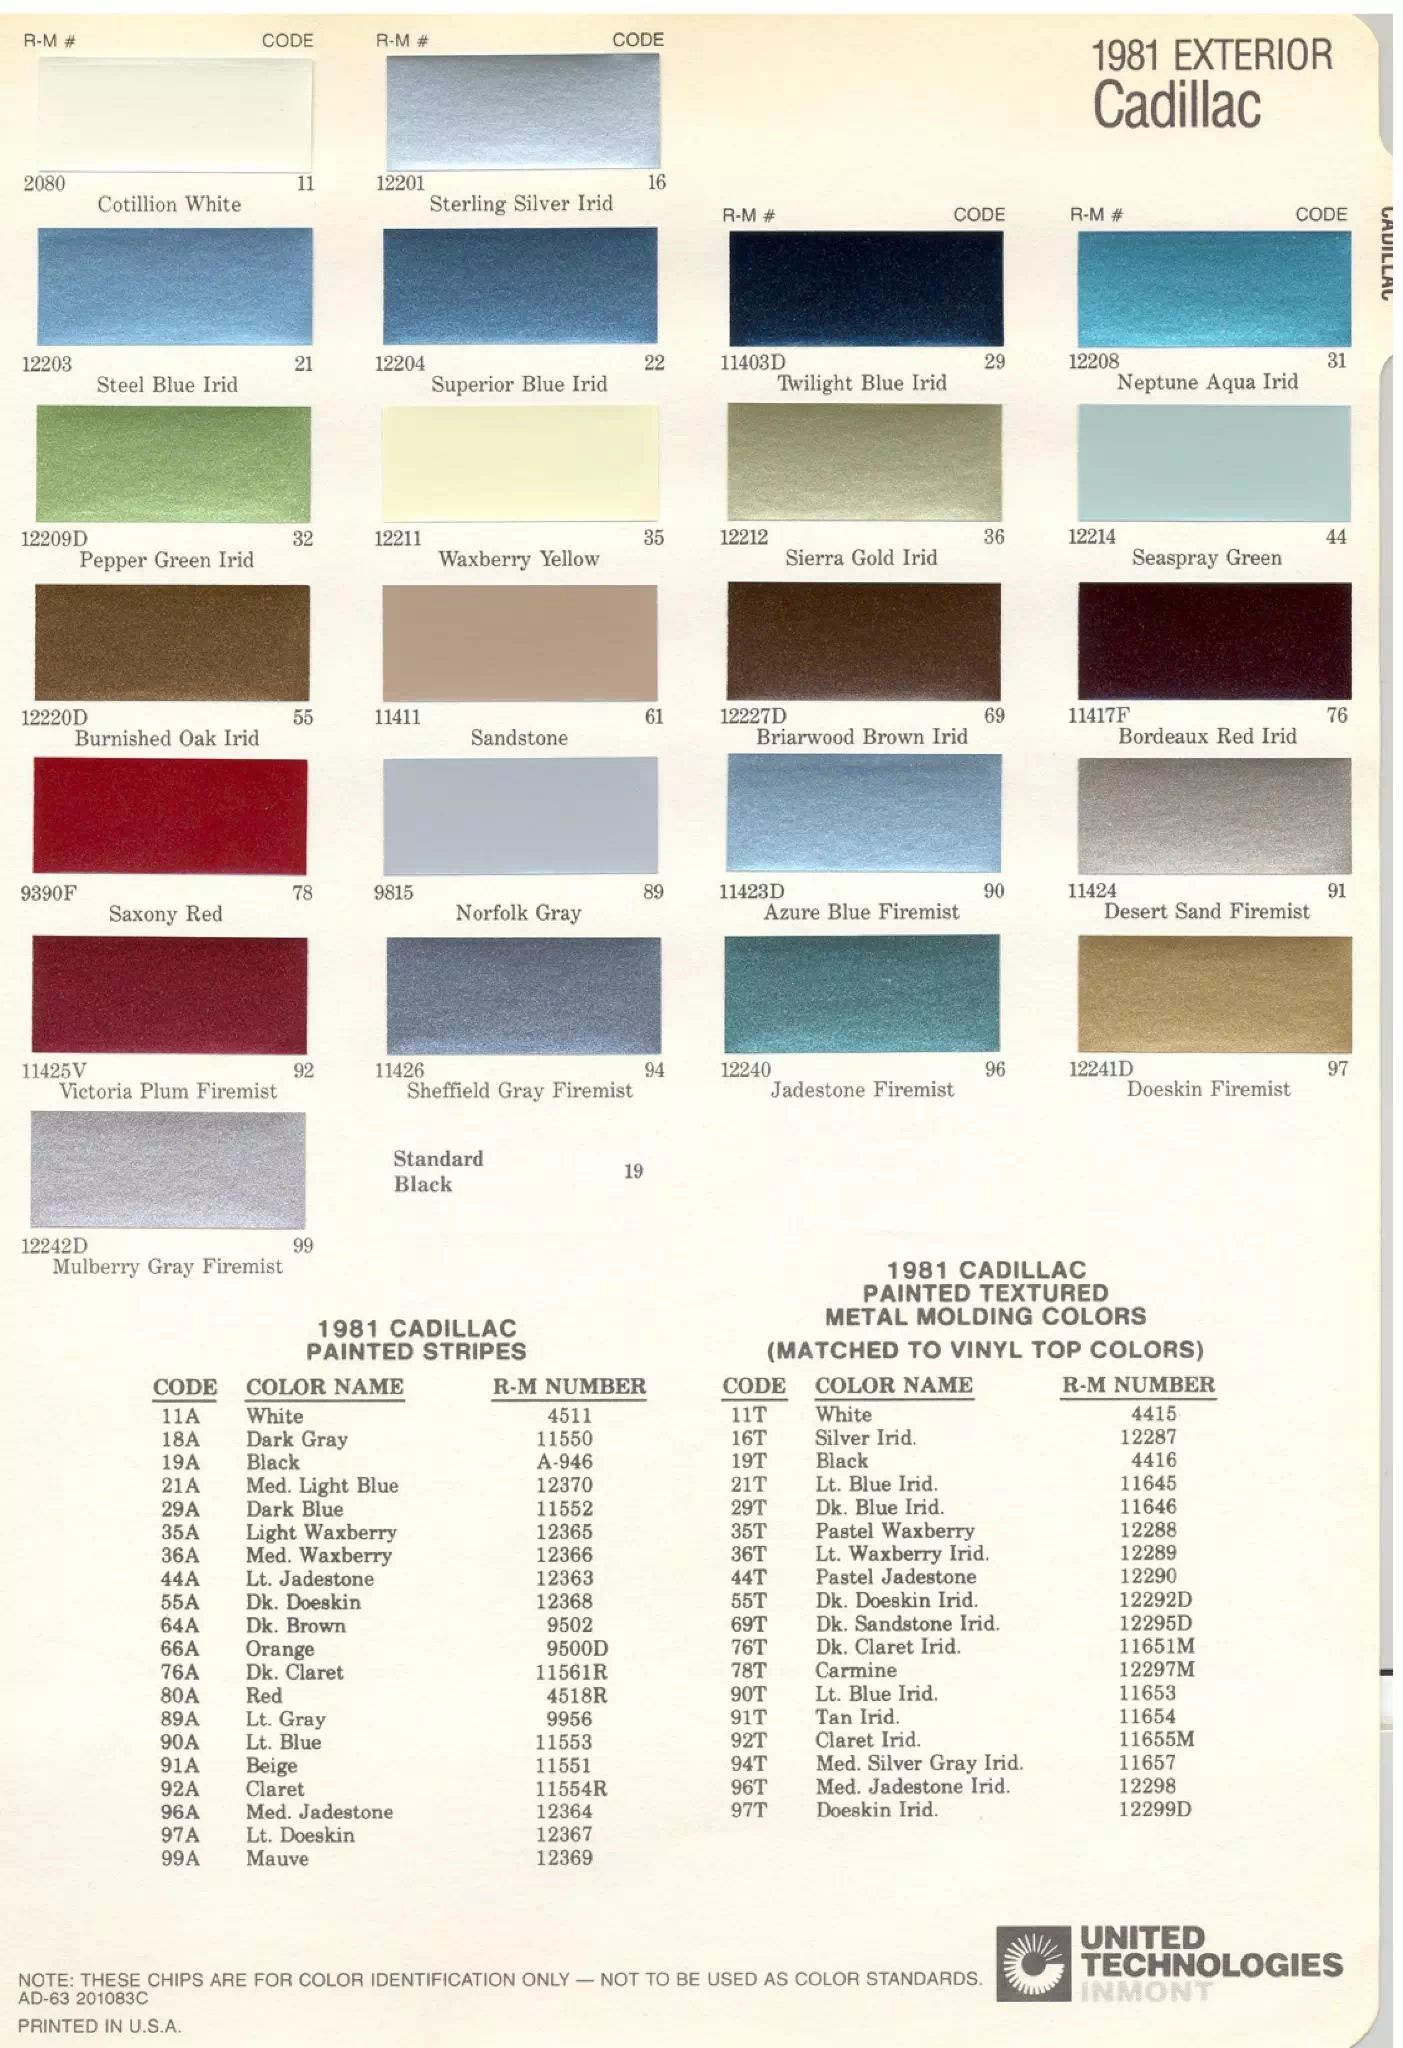 General Motors oem paint swatches, color codes and color names for 1981 vehicles.